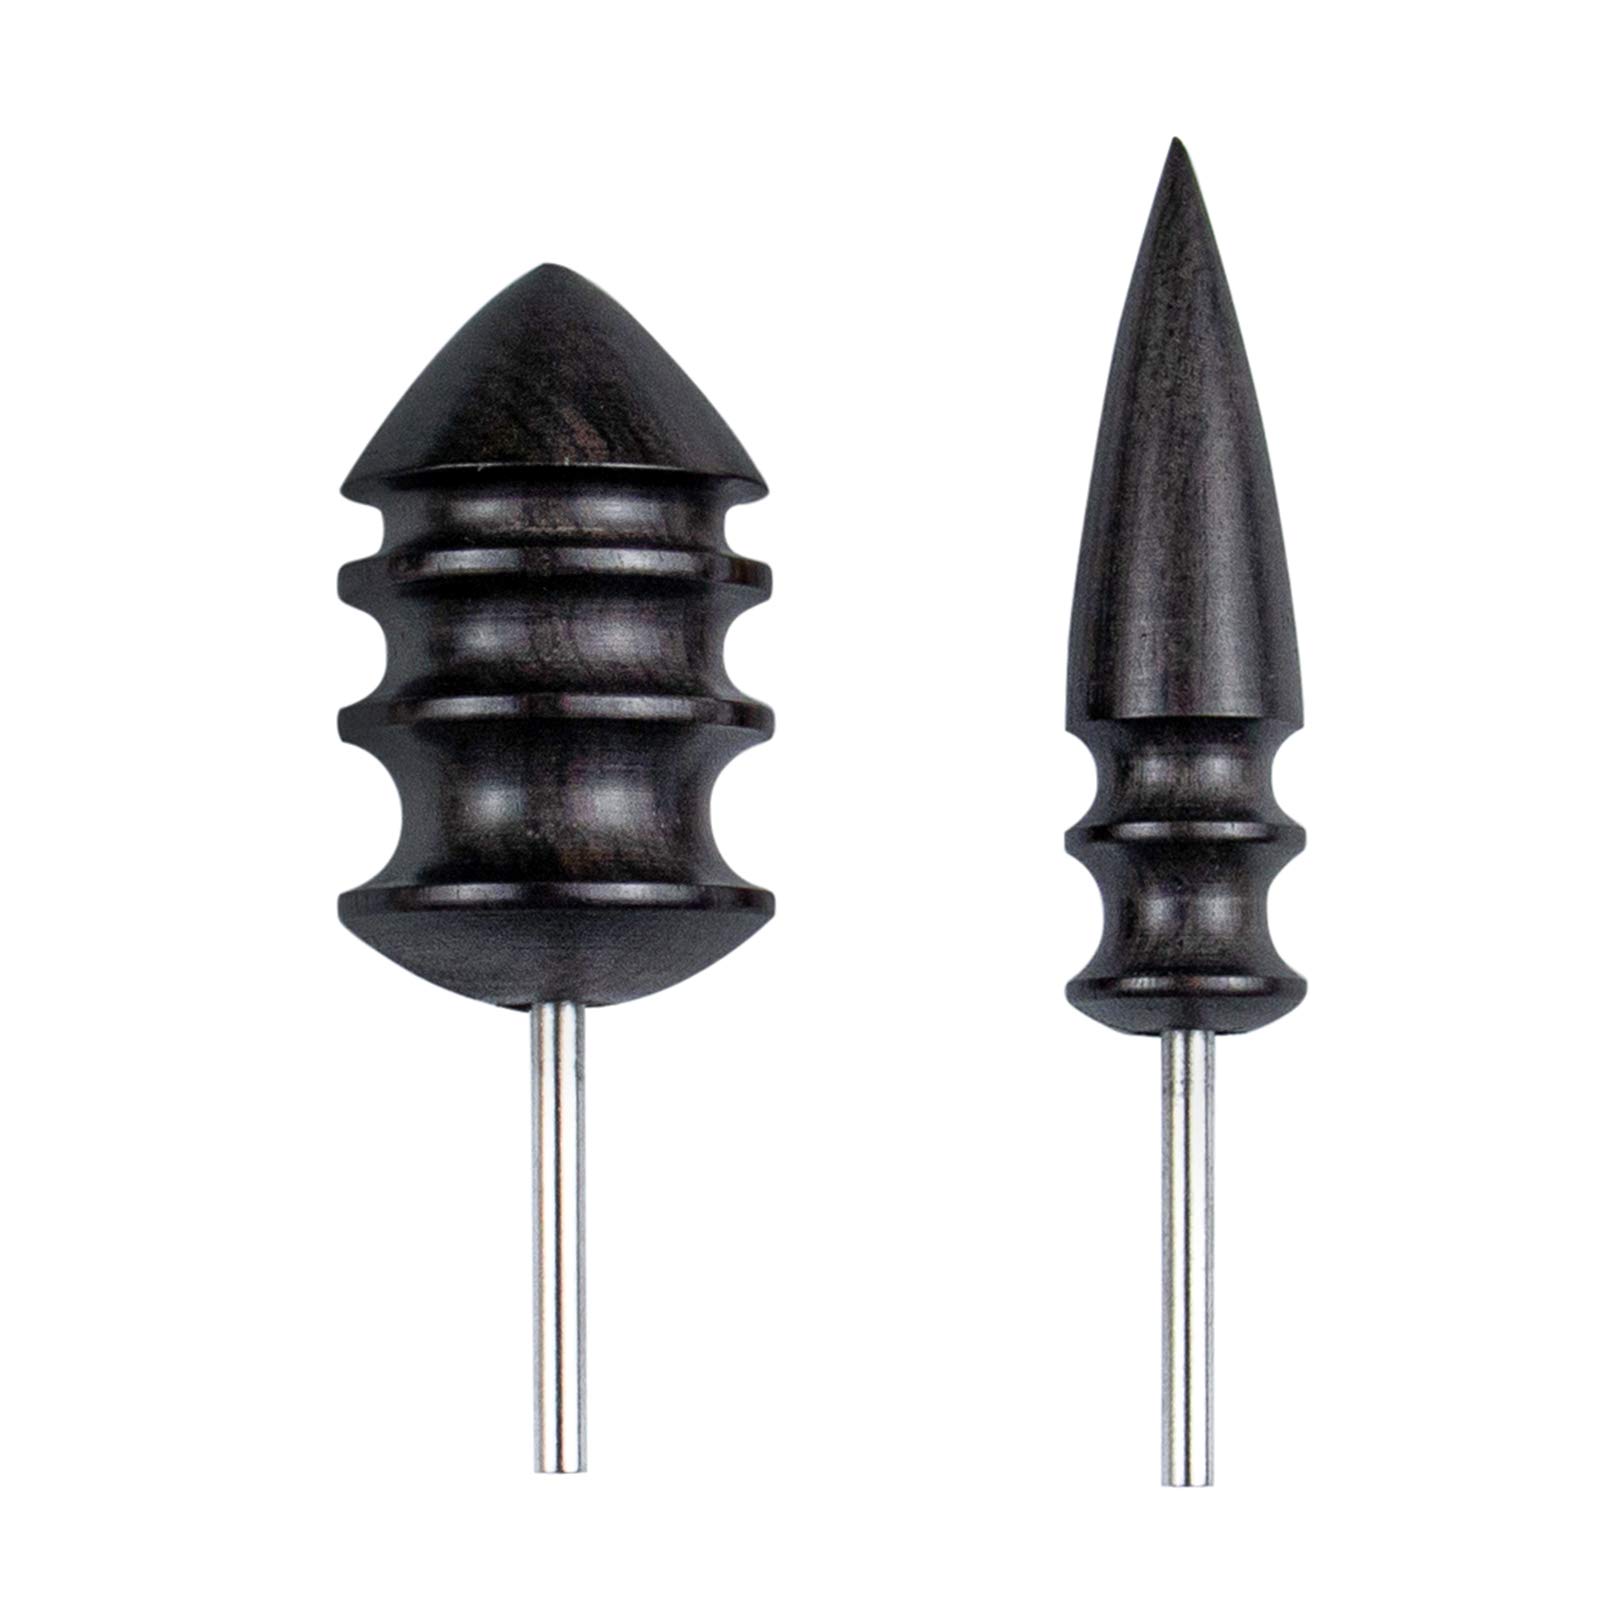 La Queenie 2 Pack Leather Burnisher Bits,Leather Slicker Burnishing Tool,Edge Burnisher Creaser Electric Polished Head for DIY Leather Hand Making